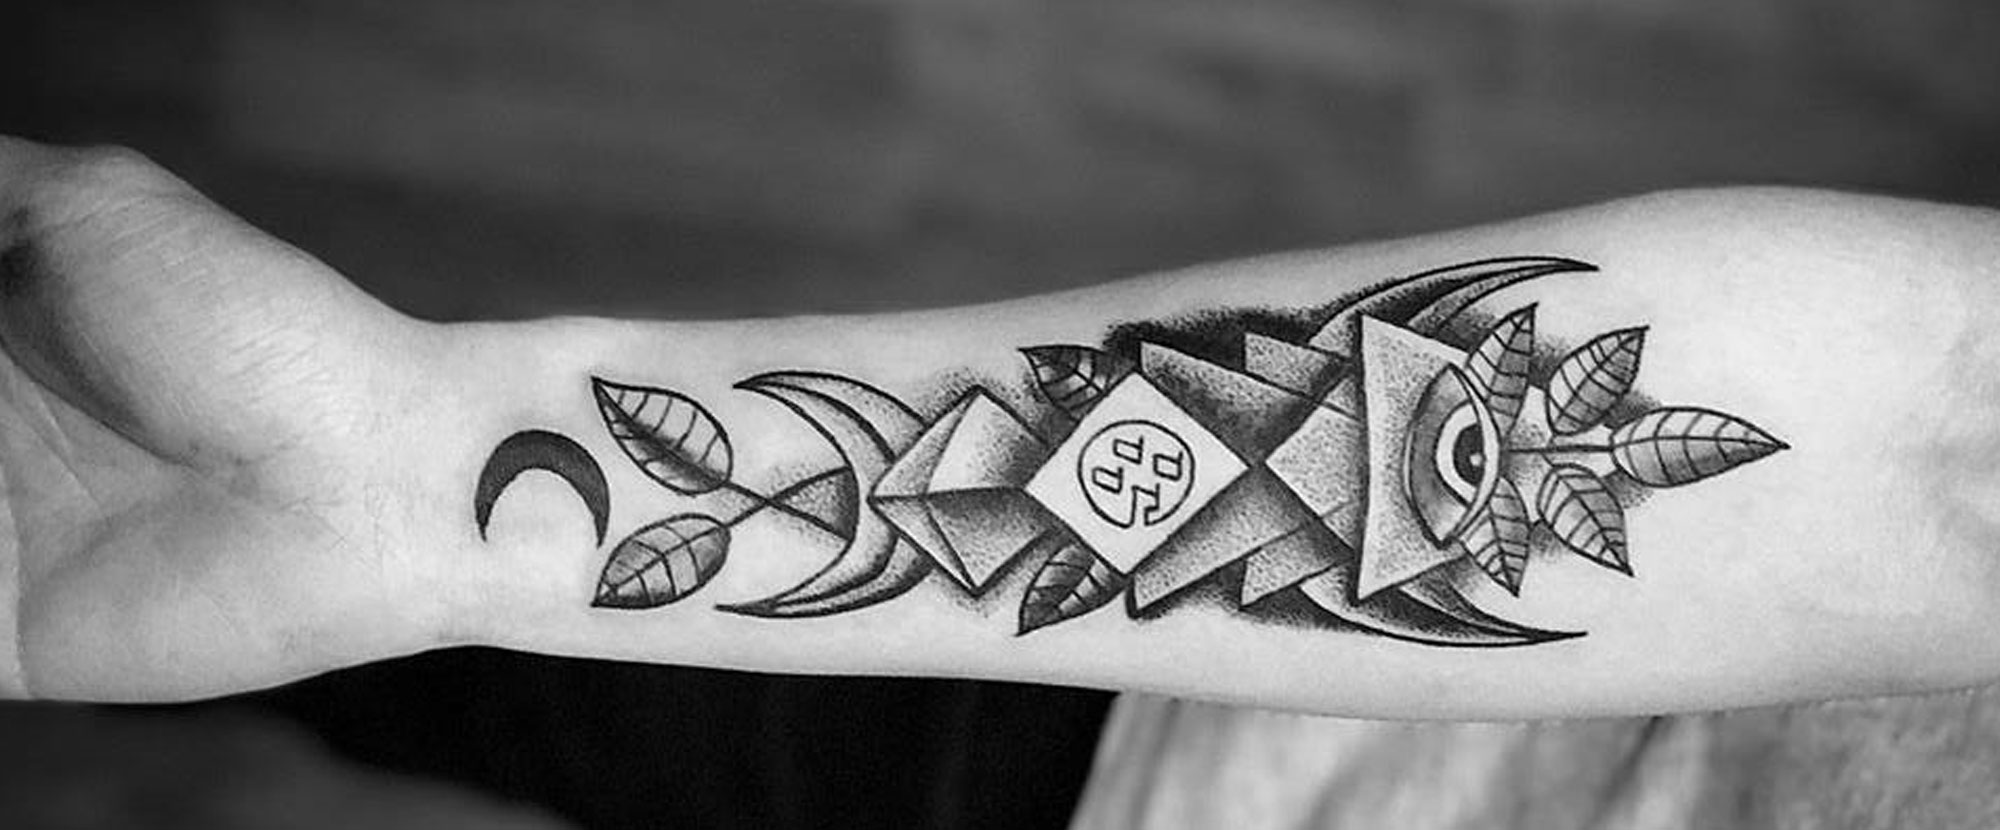 How to Find the Best Tattoo Parlor in Los Angeles